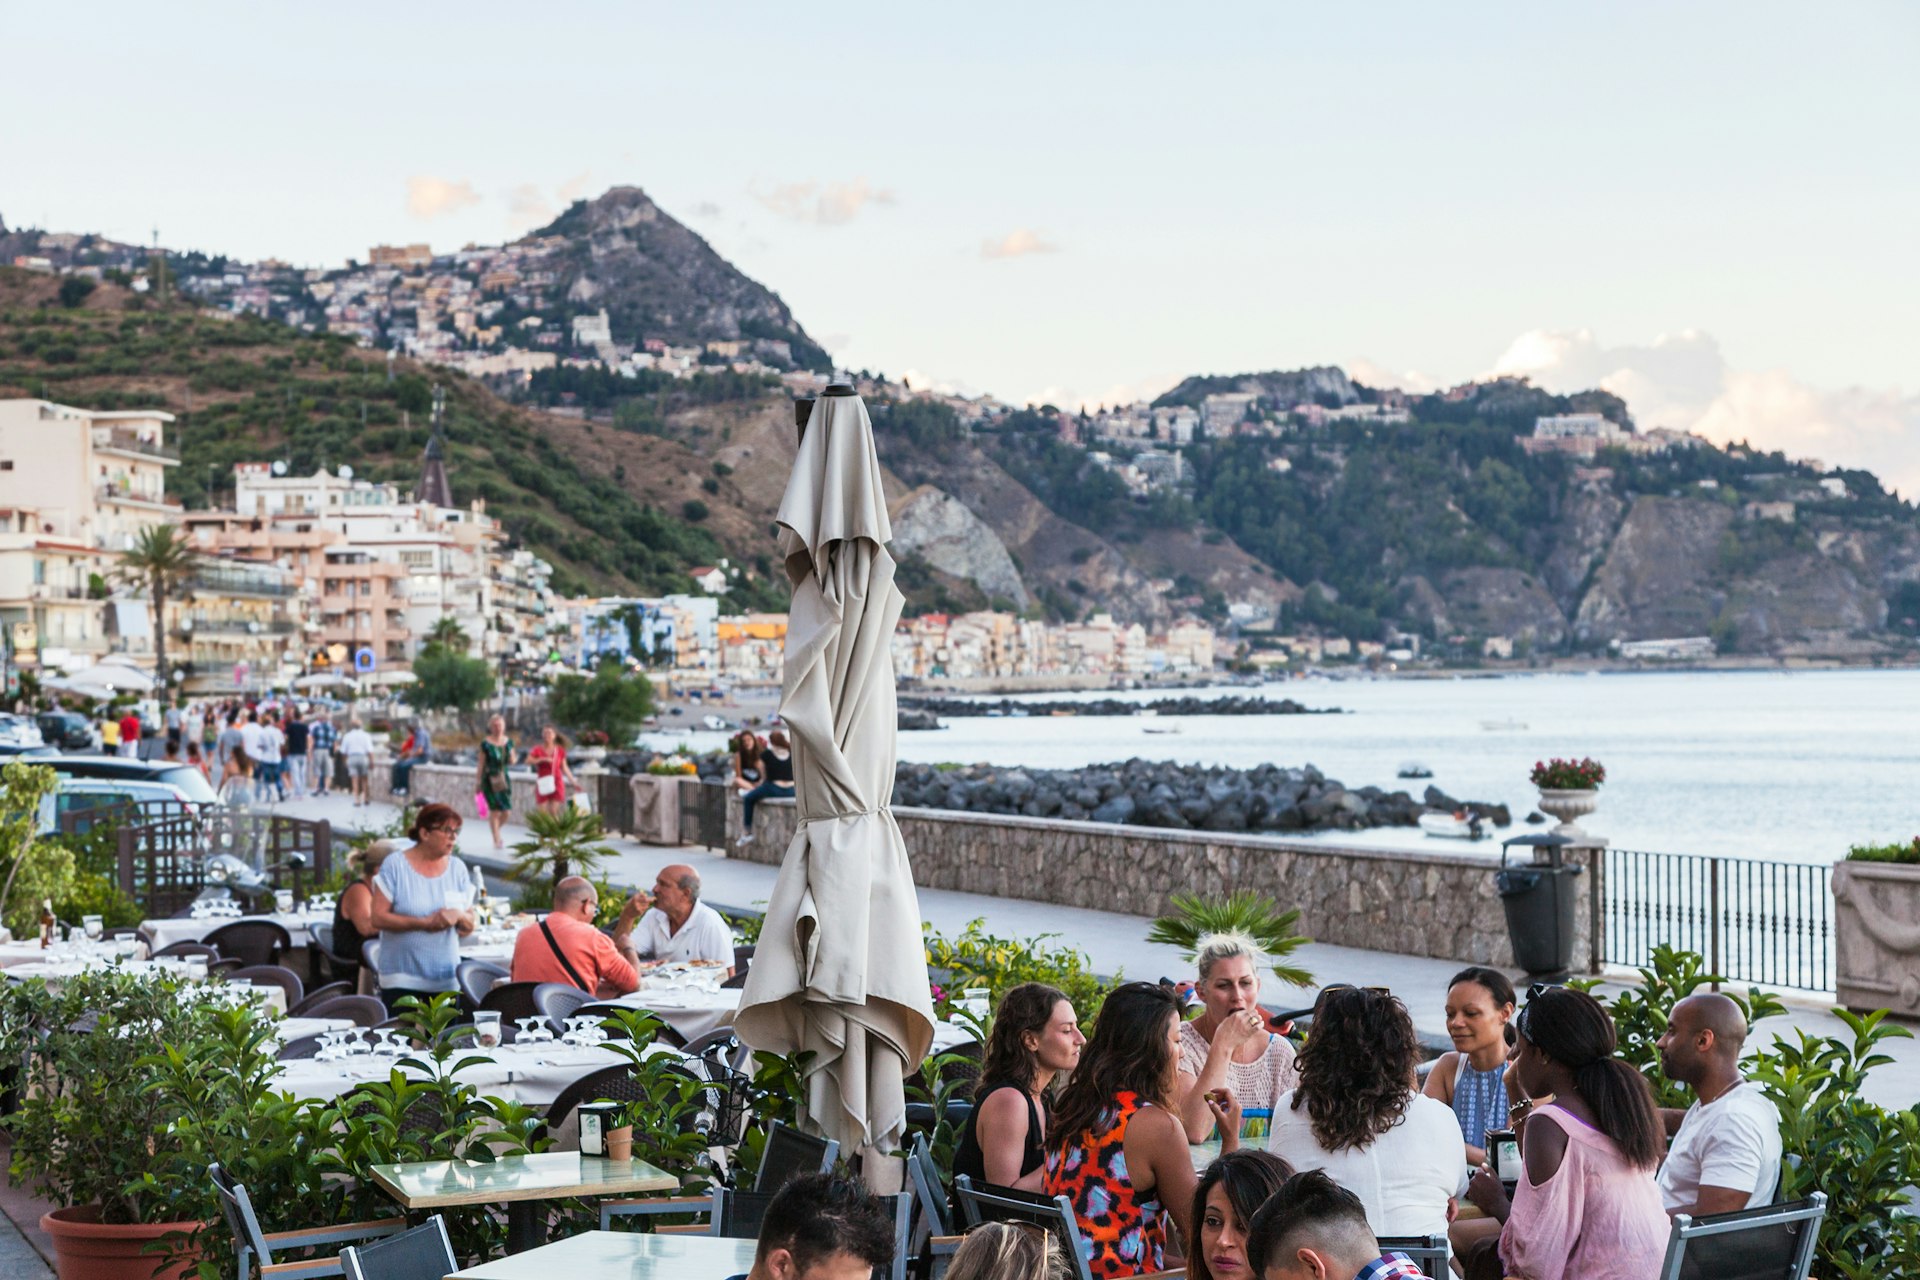 Groups of people sit at restaurant tables on a terrace by the sea 